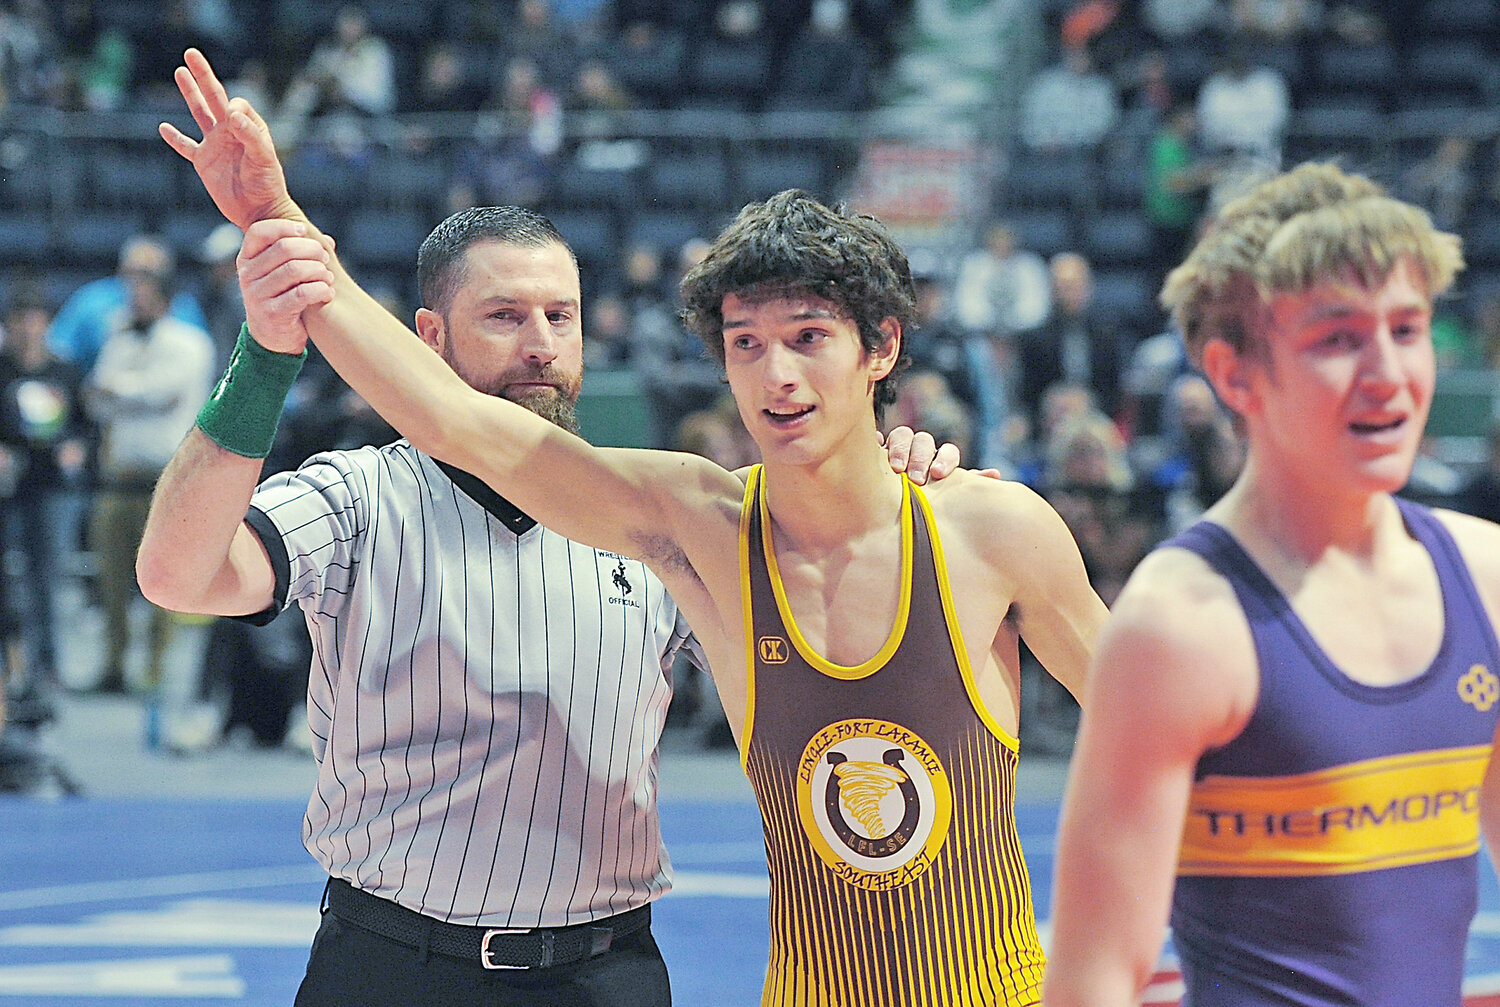 Junior Nathan Fish secured the state championship at 120 pounds.